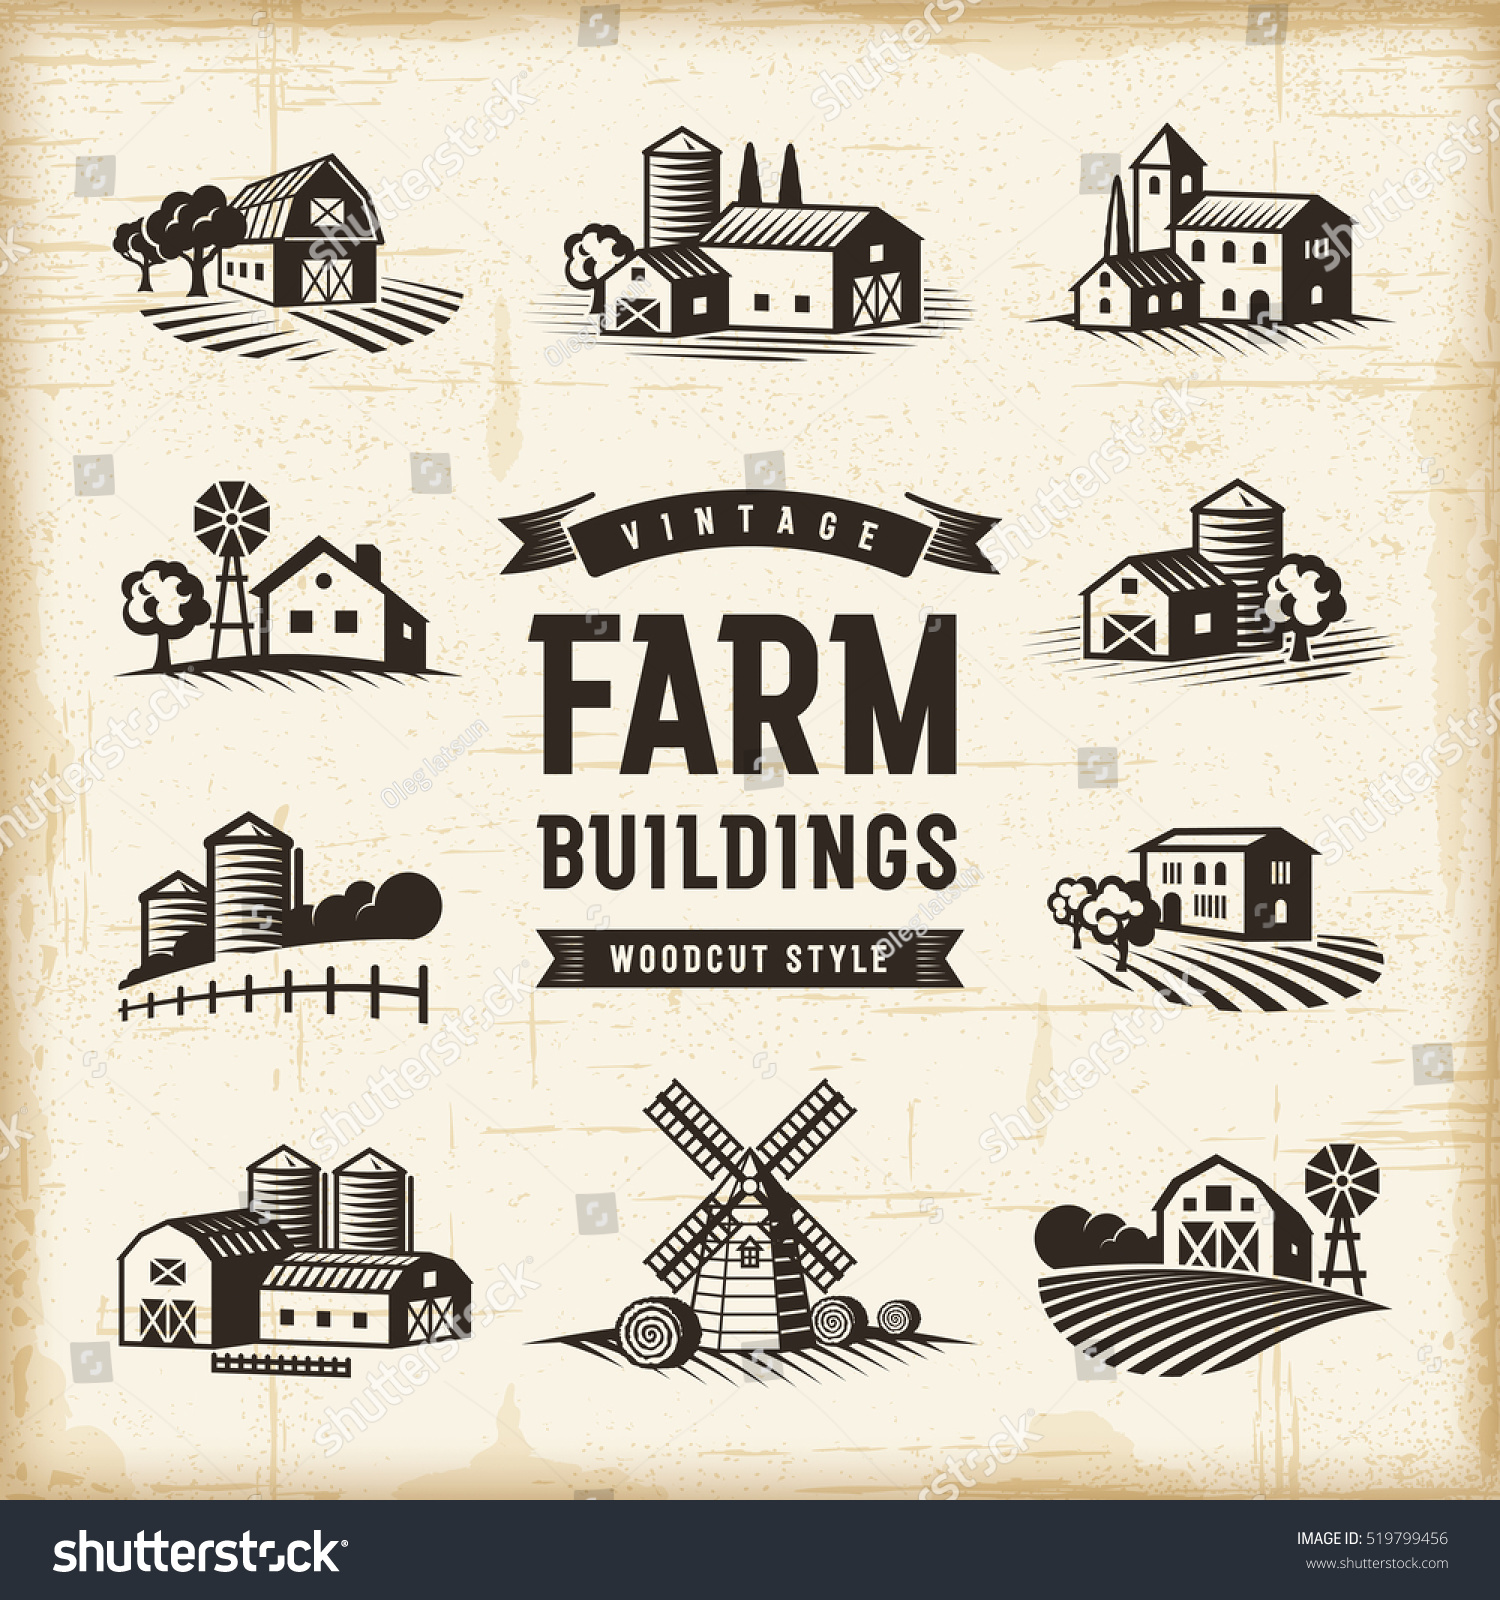 Vintage Farm Buildings Set. Editable EPS10 vector illustration in retro woodcut style with clipping mask and transparency. #519799456